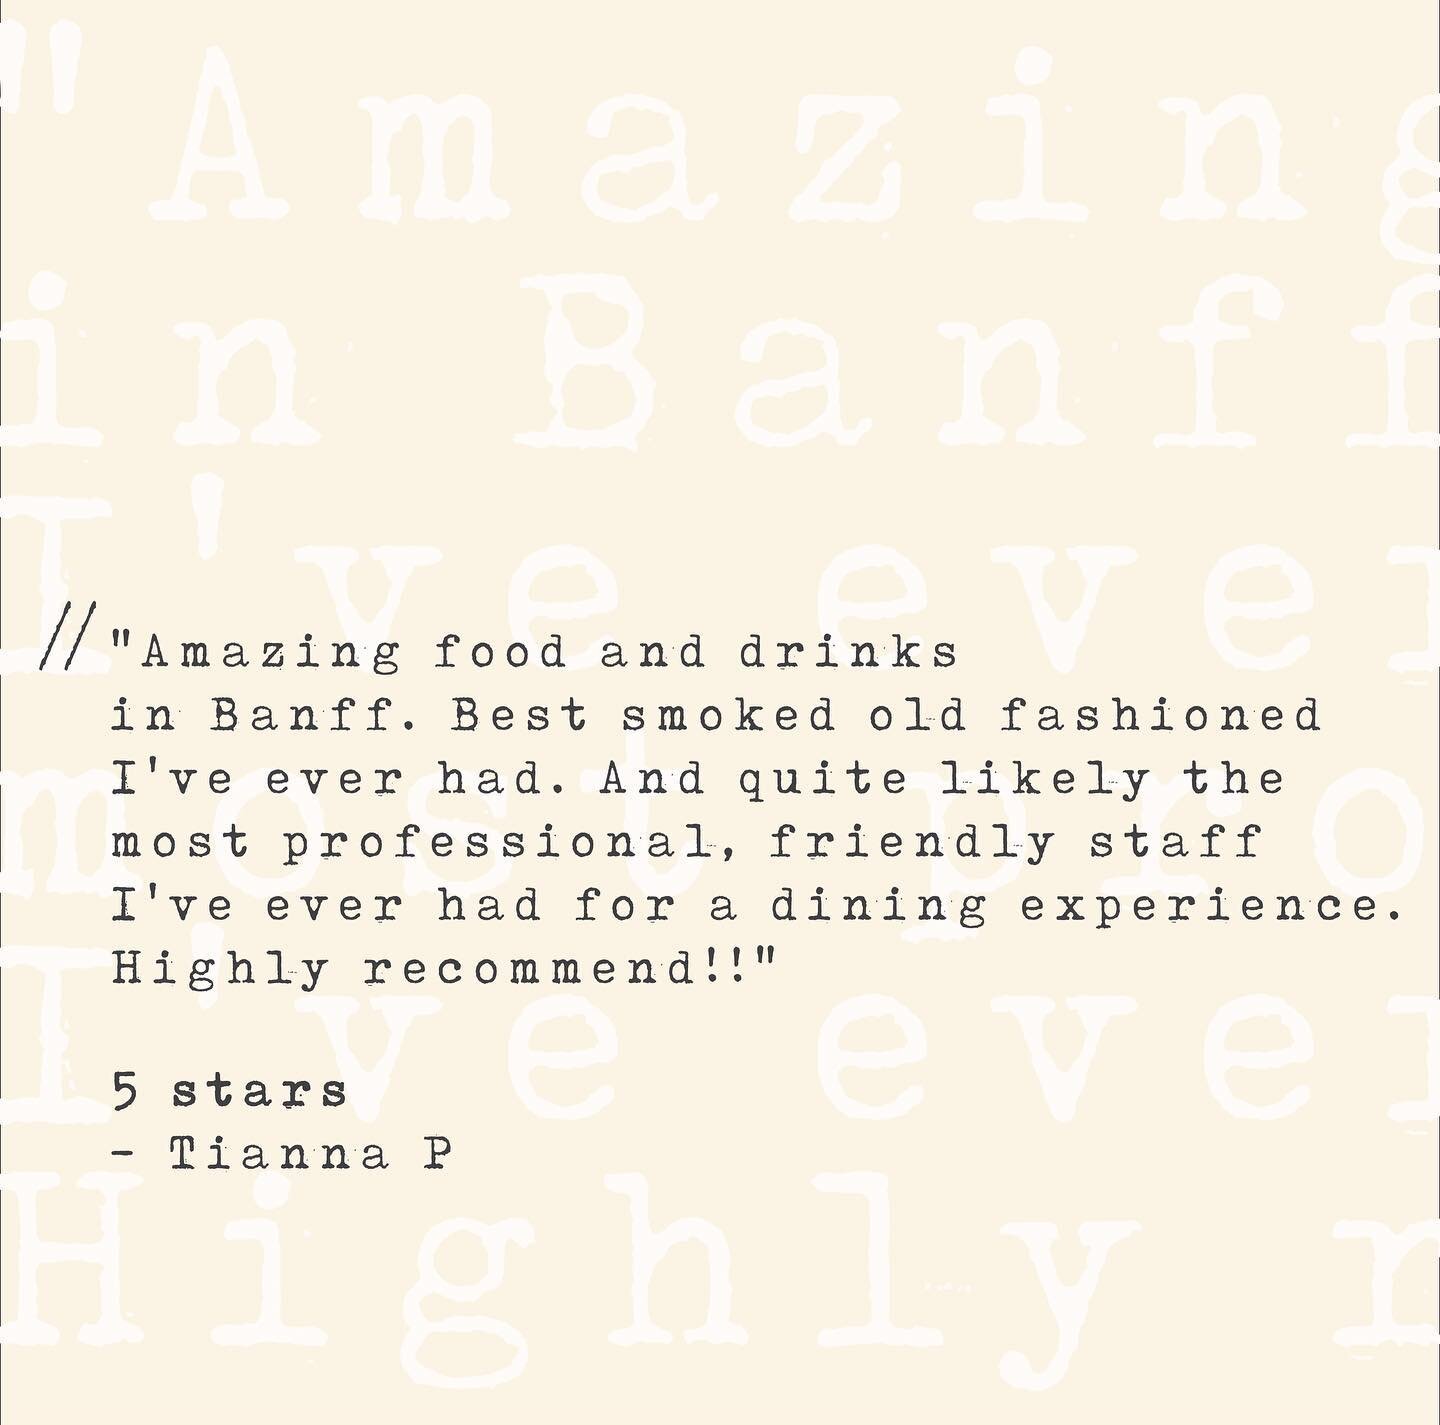 We love hearing from our guests - thank you for taking the time to share your dining experience with us! 💛